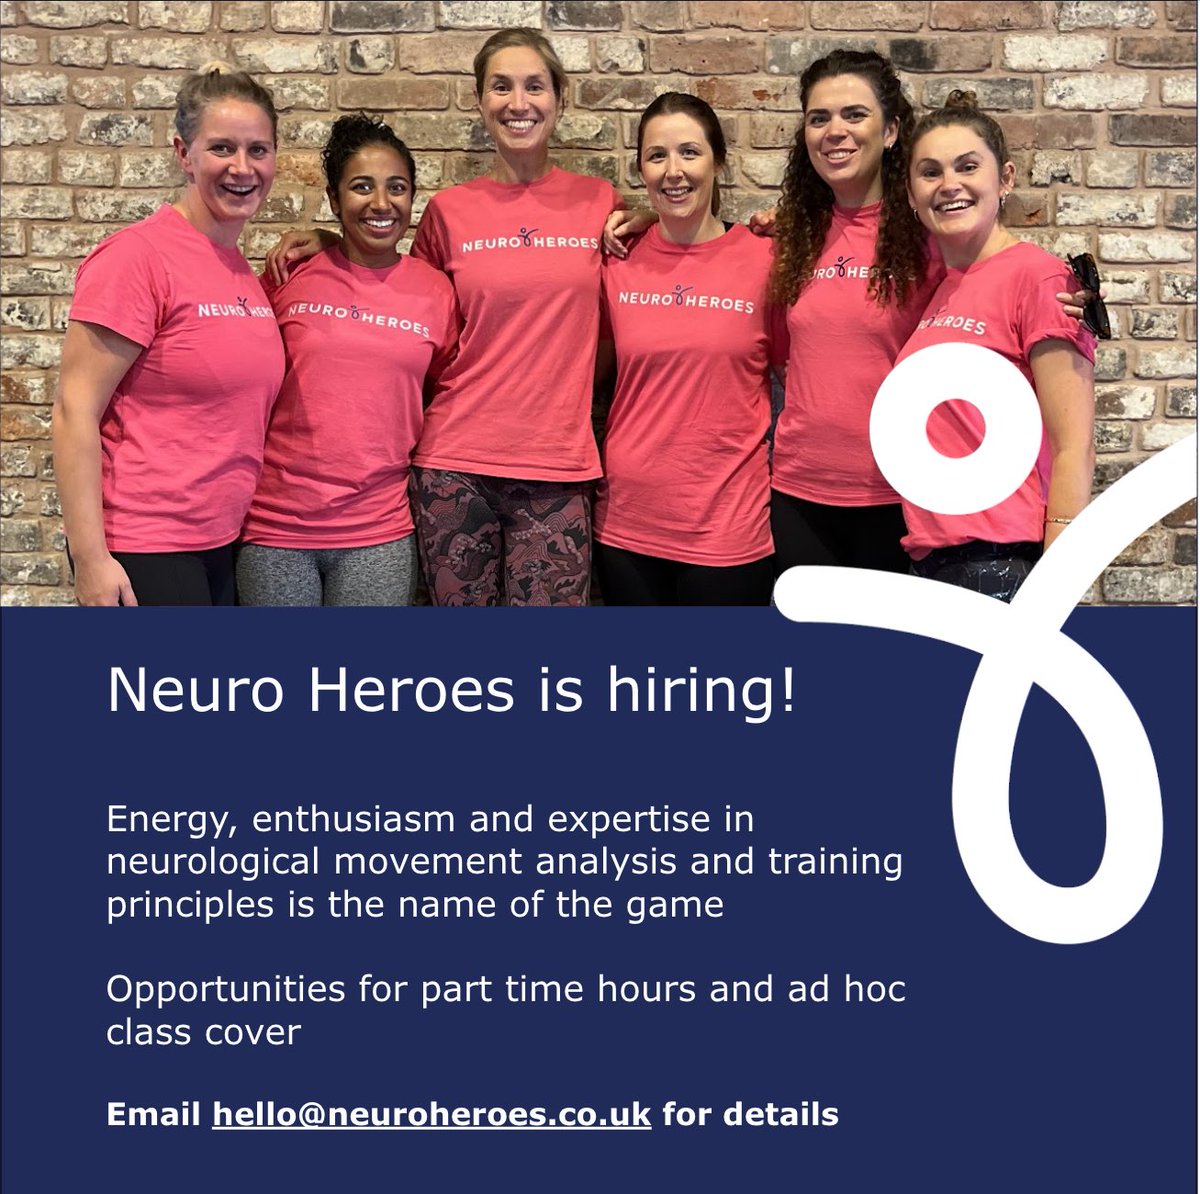 Neuro Heroes is an online gym for people with neuro conditions. It brings energy and expertise to the physio-led sessions our community love!

We’re looking for excellent and dynamic neuro physios to jump in and join the team. Email for details! #neurophysio #neurophysiotherapy